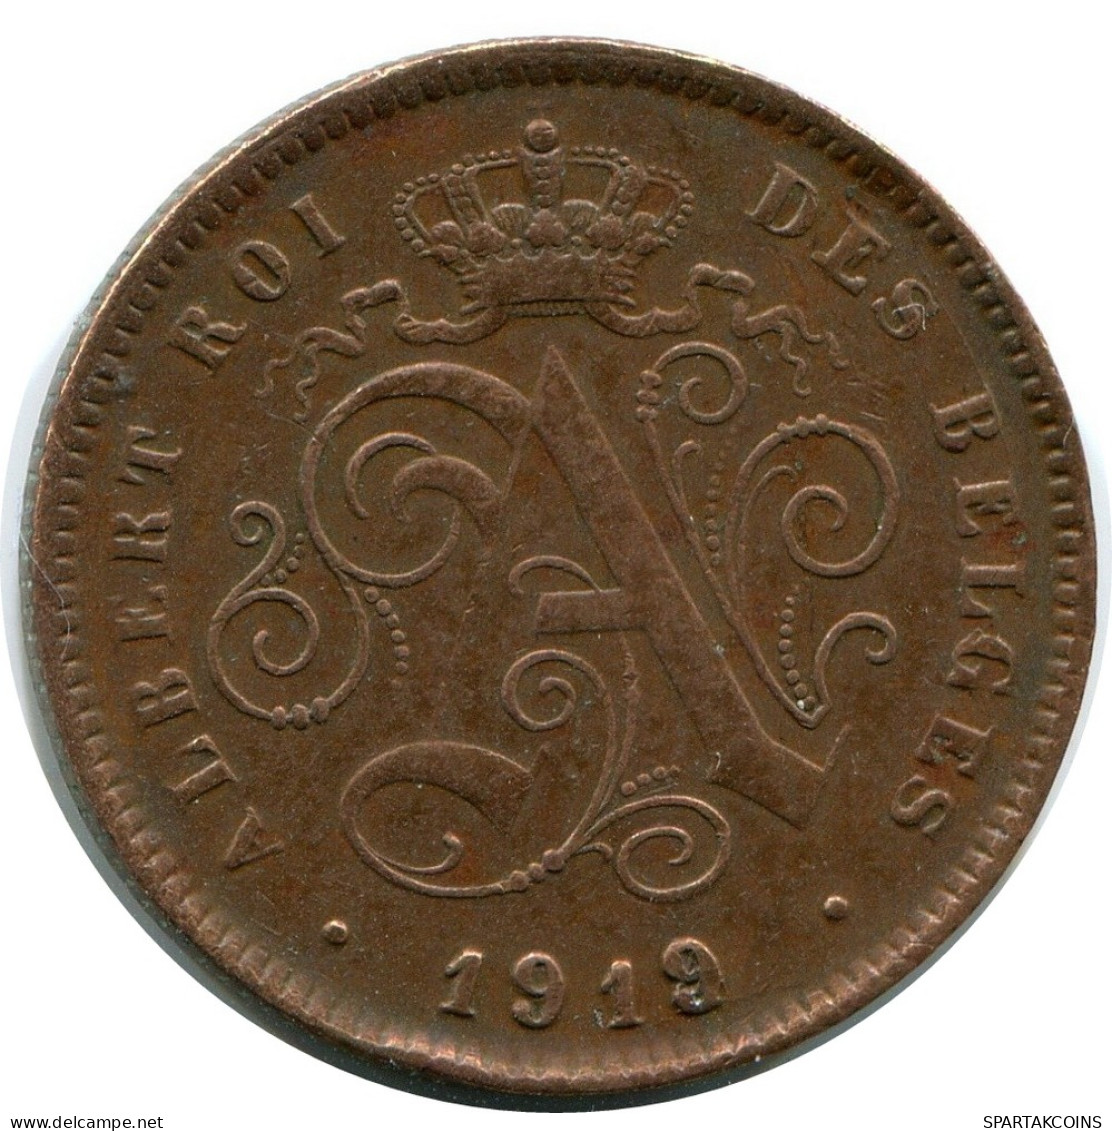 2 CENTIMES 1919 FRENCH Text BELGIUM Coin #BA432.U - 2 Cent